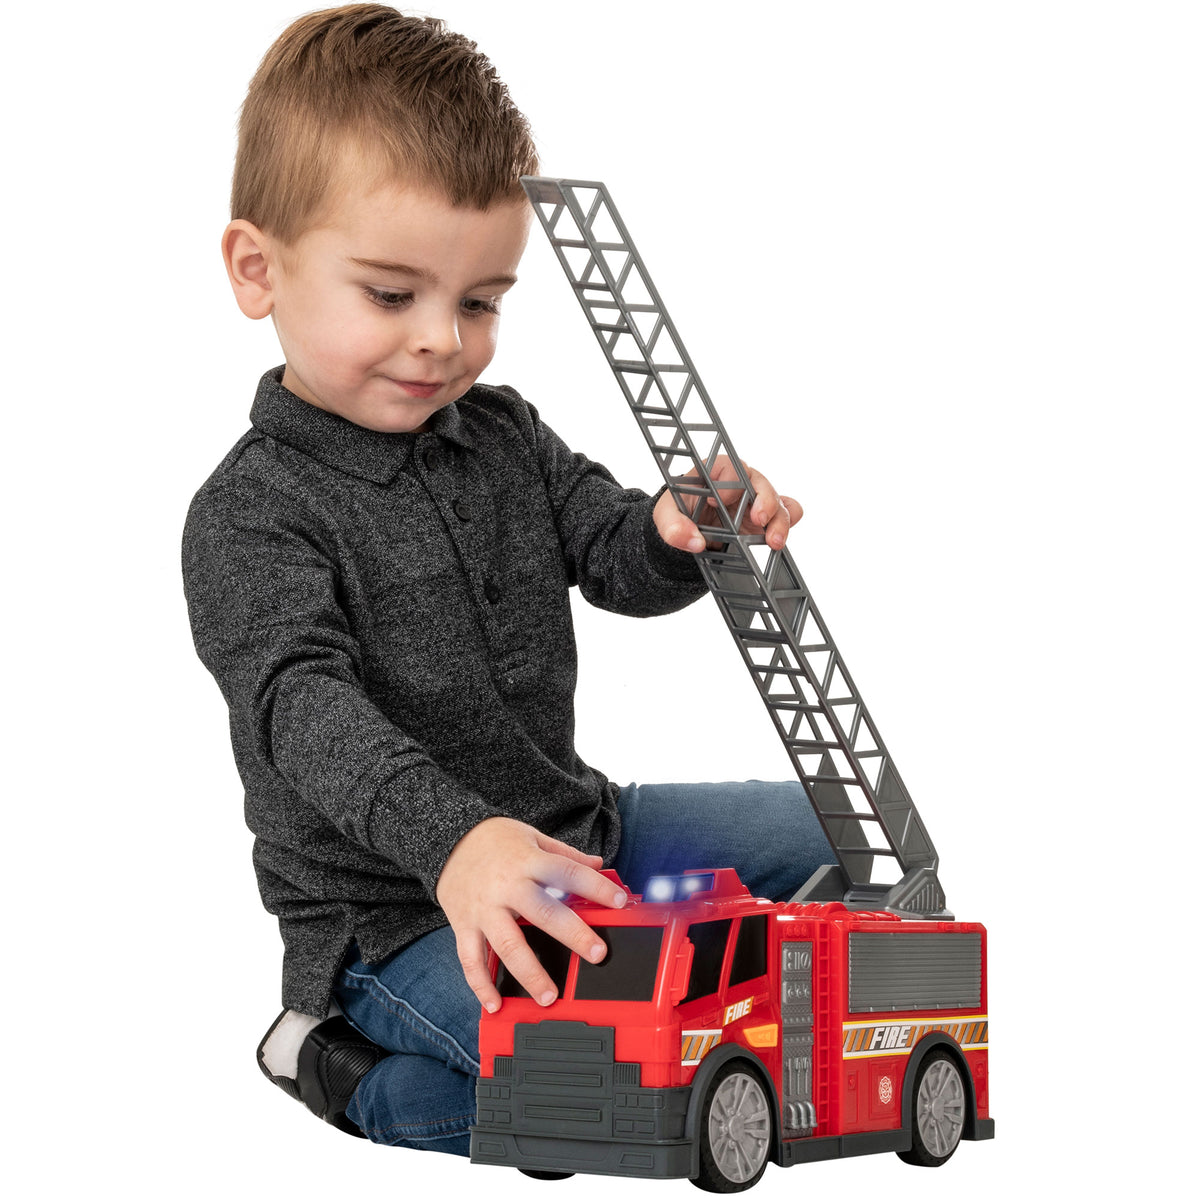 Teamsterz Mighty Machines Medium Fire Engine Toy